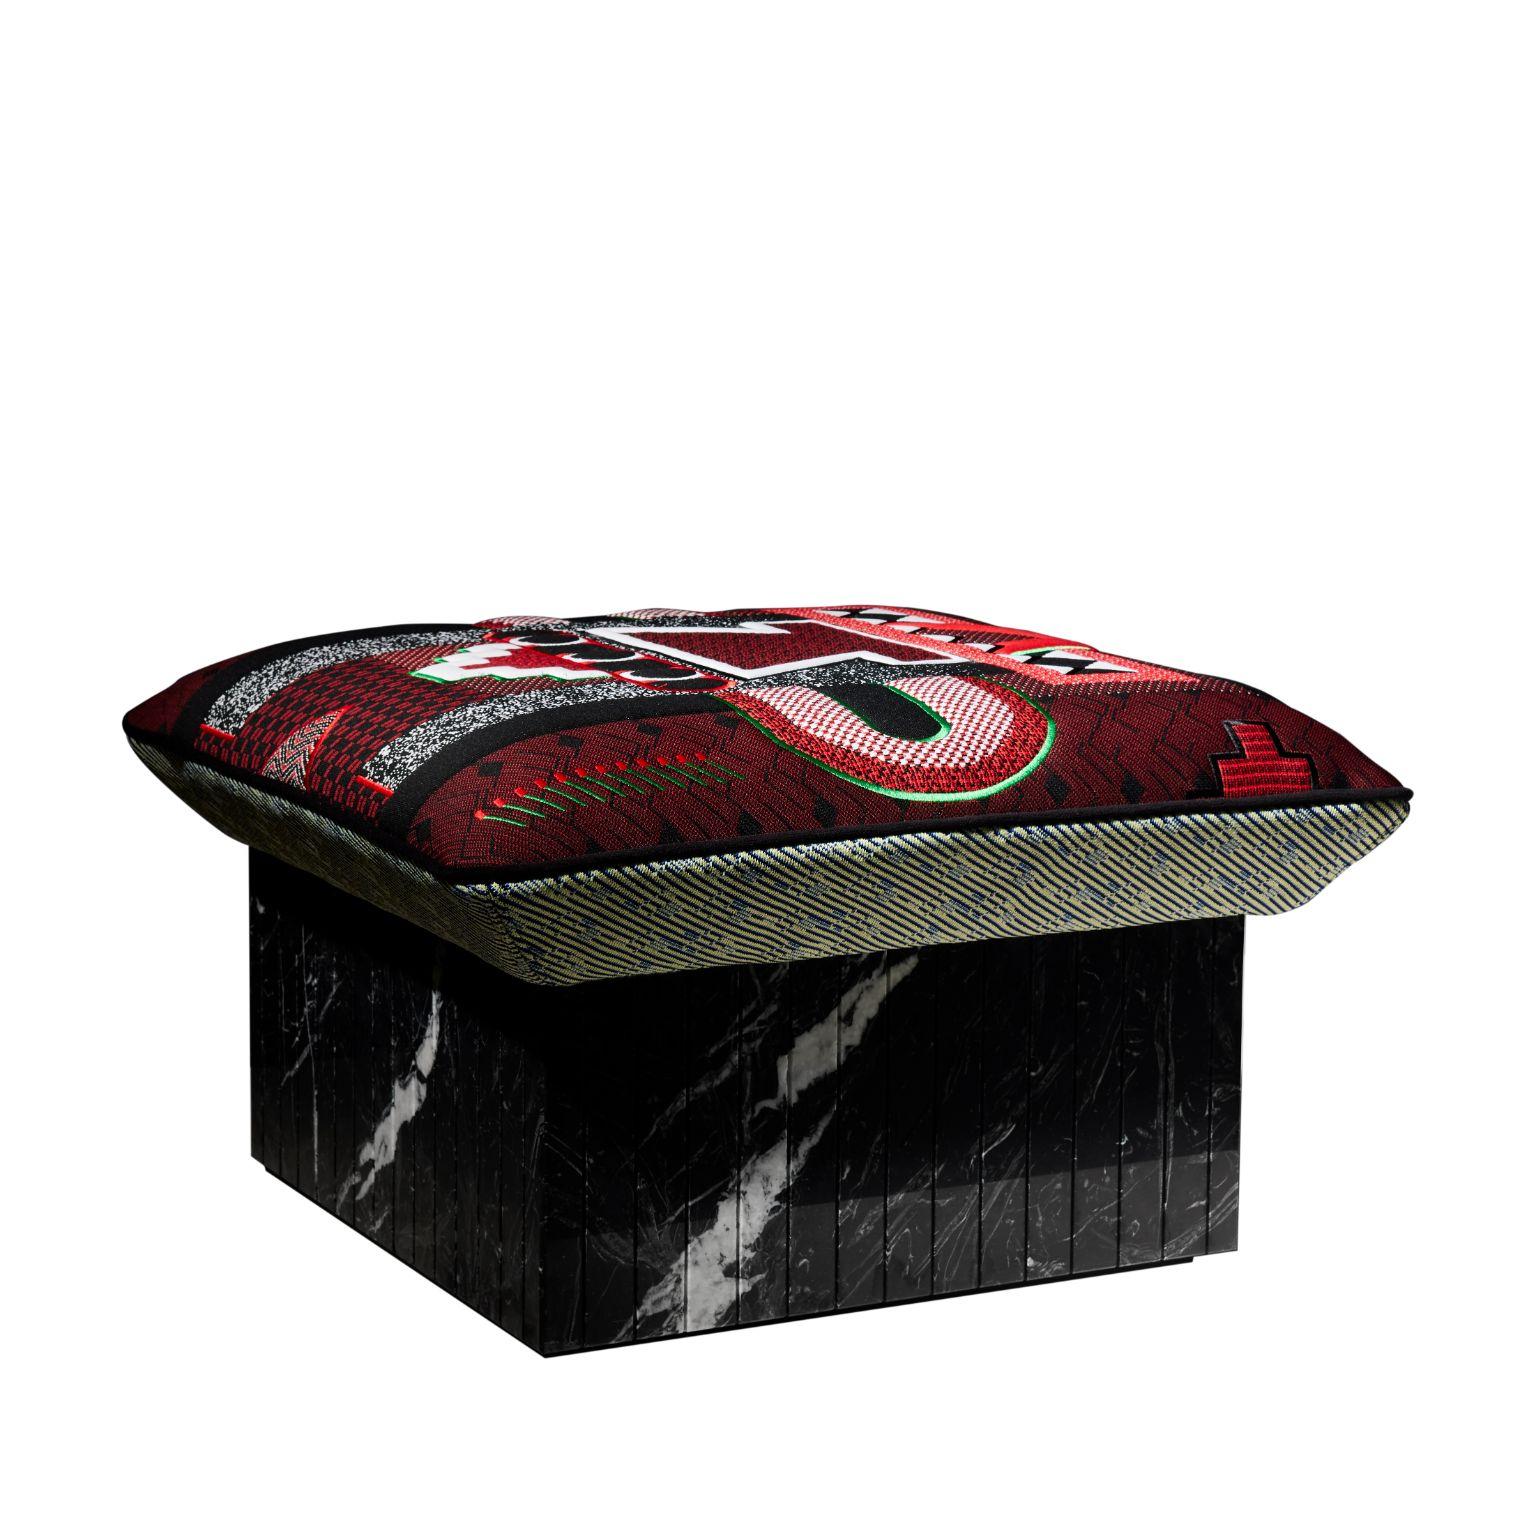 Hopi Ottoman red pattern by Marta Bakowski
Dimensions:D65 x W65 x 44 cm
Materials: Marble and fabric.
Also available in different finishes.

HOPI, this new collection of ottomans inspired by Native American Indian culture, is made of a very special